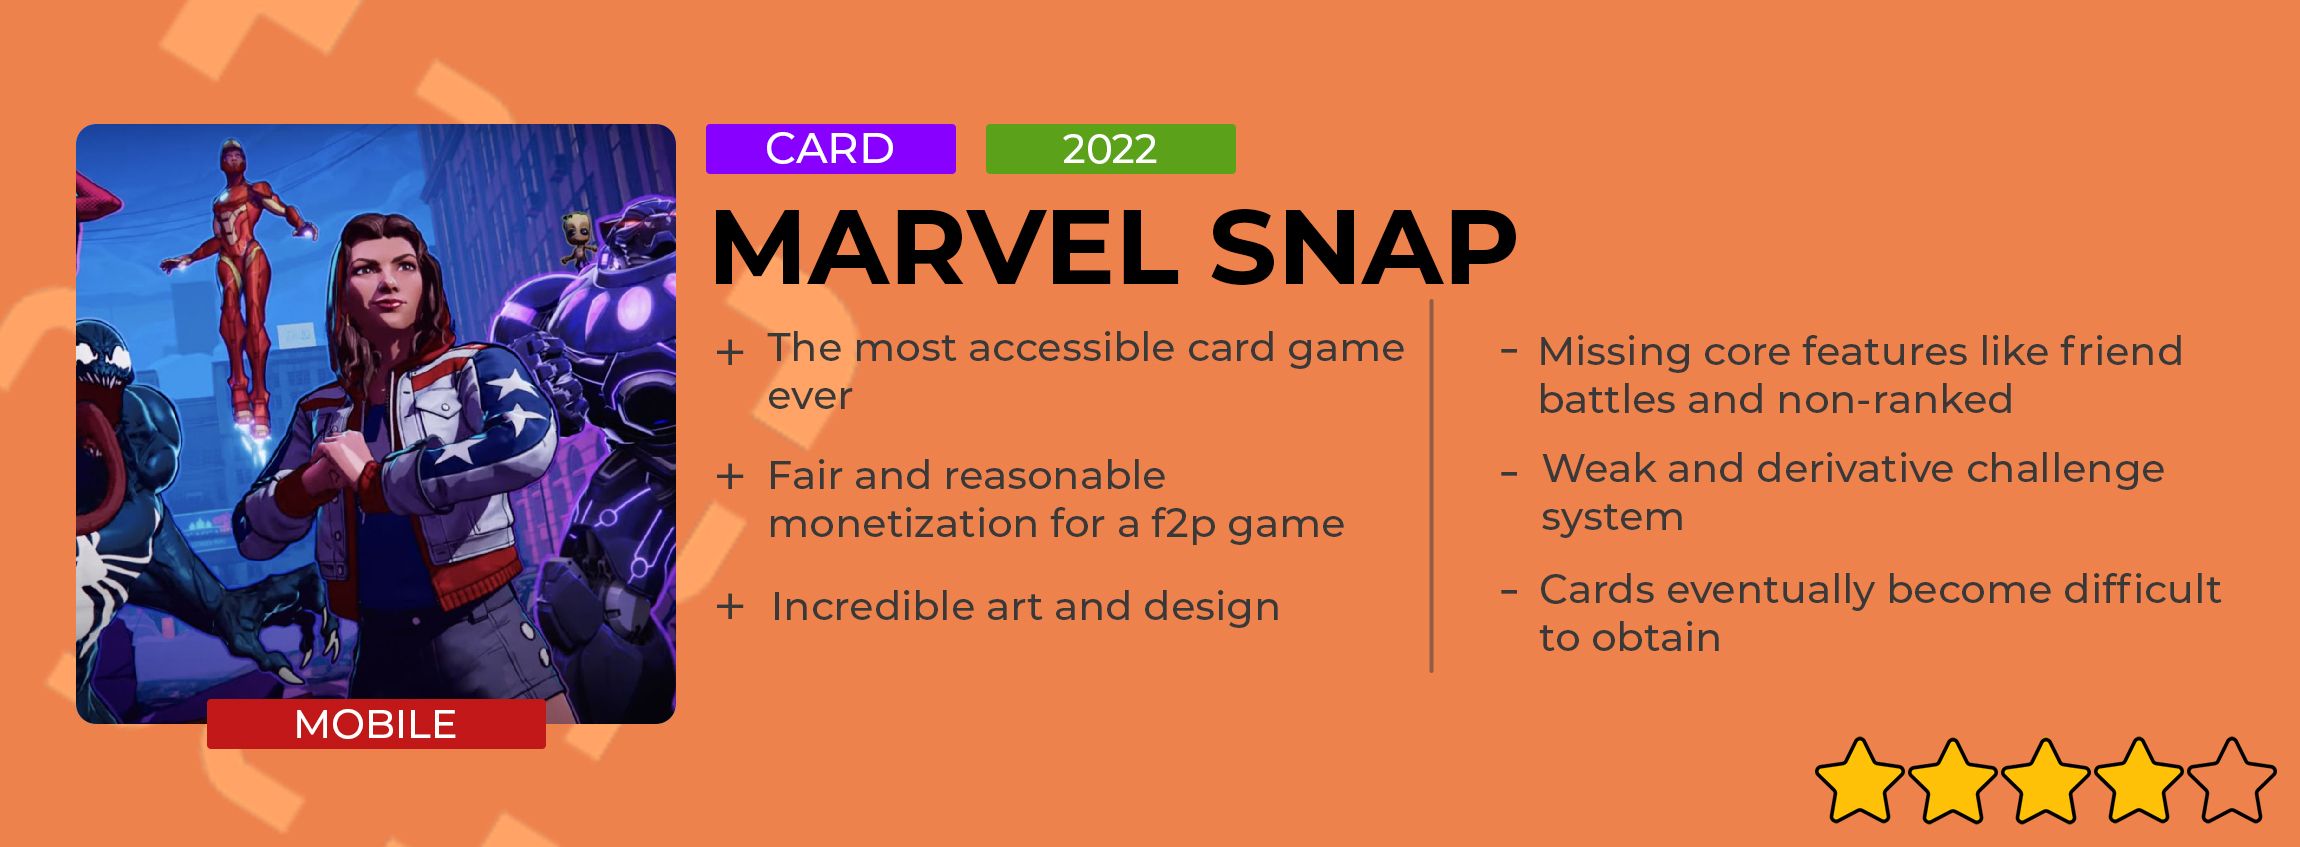 Marvel Snap review card